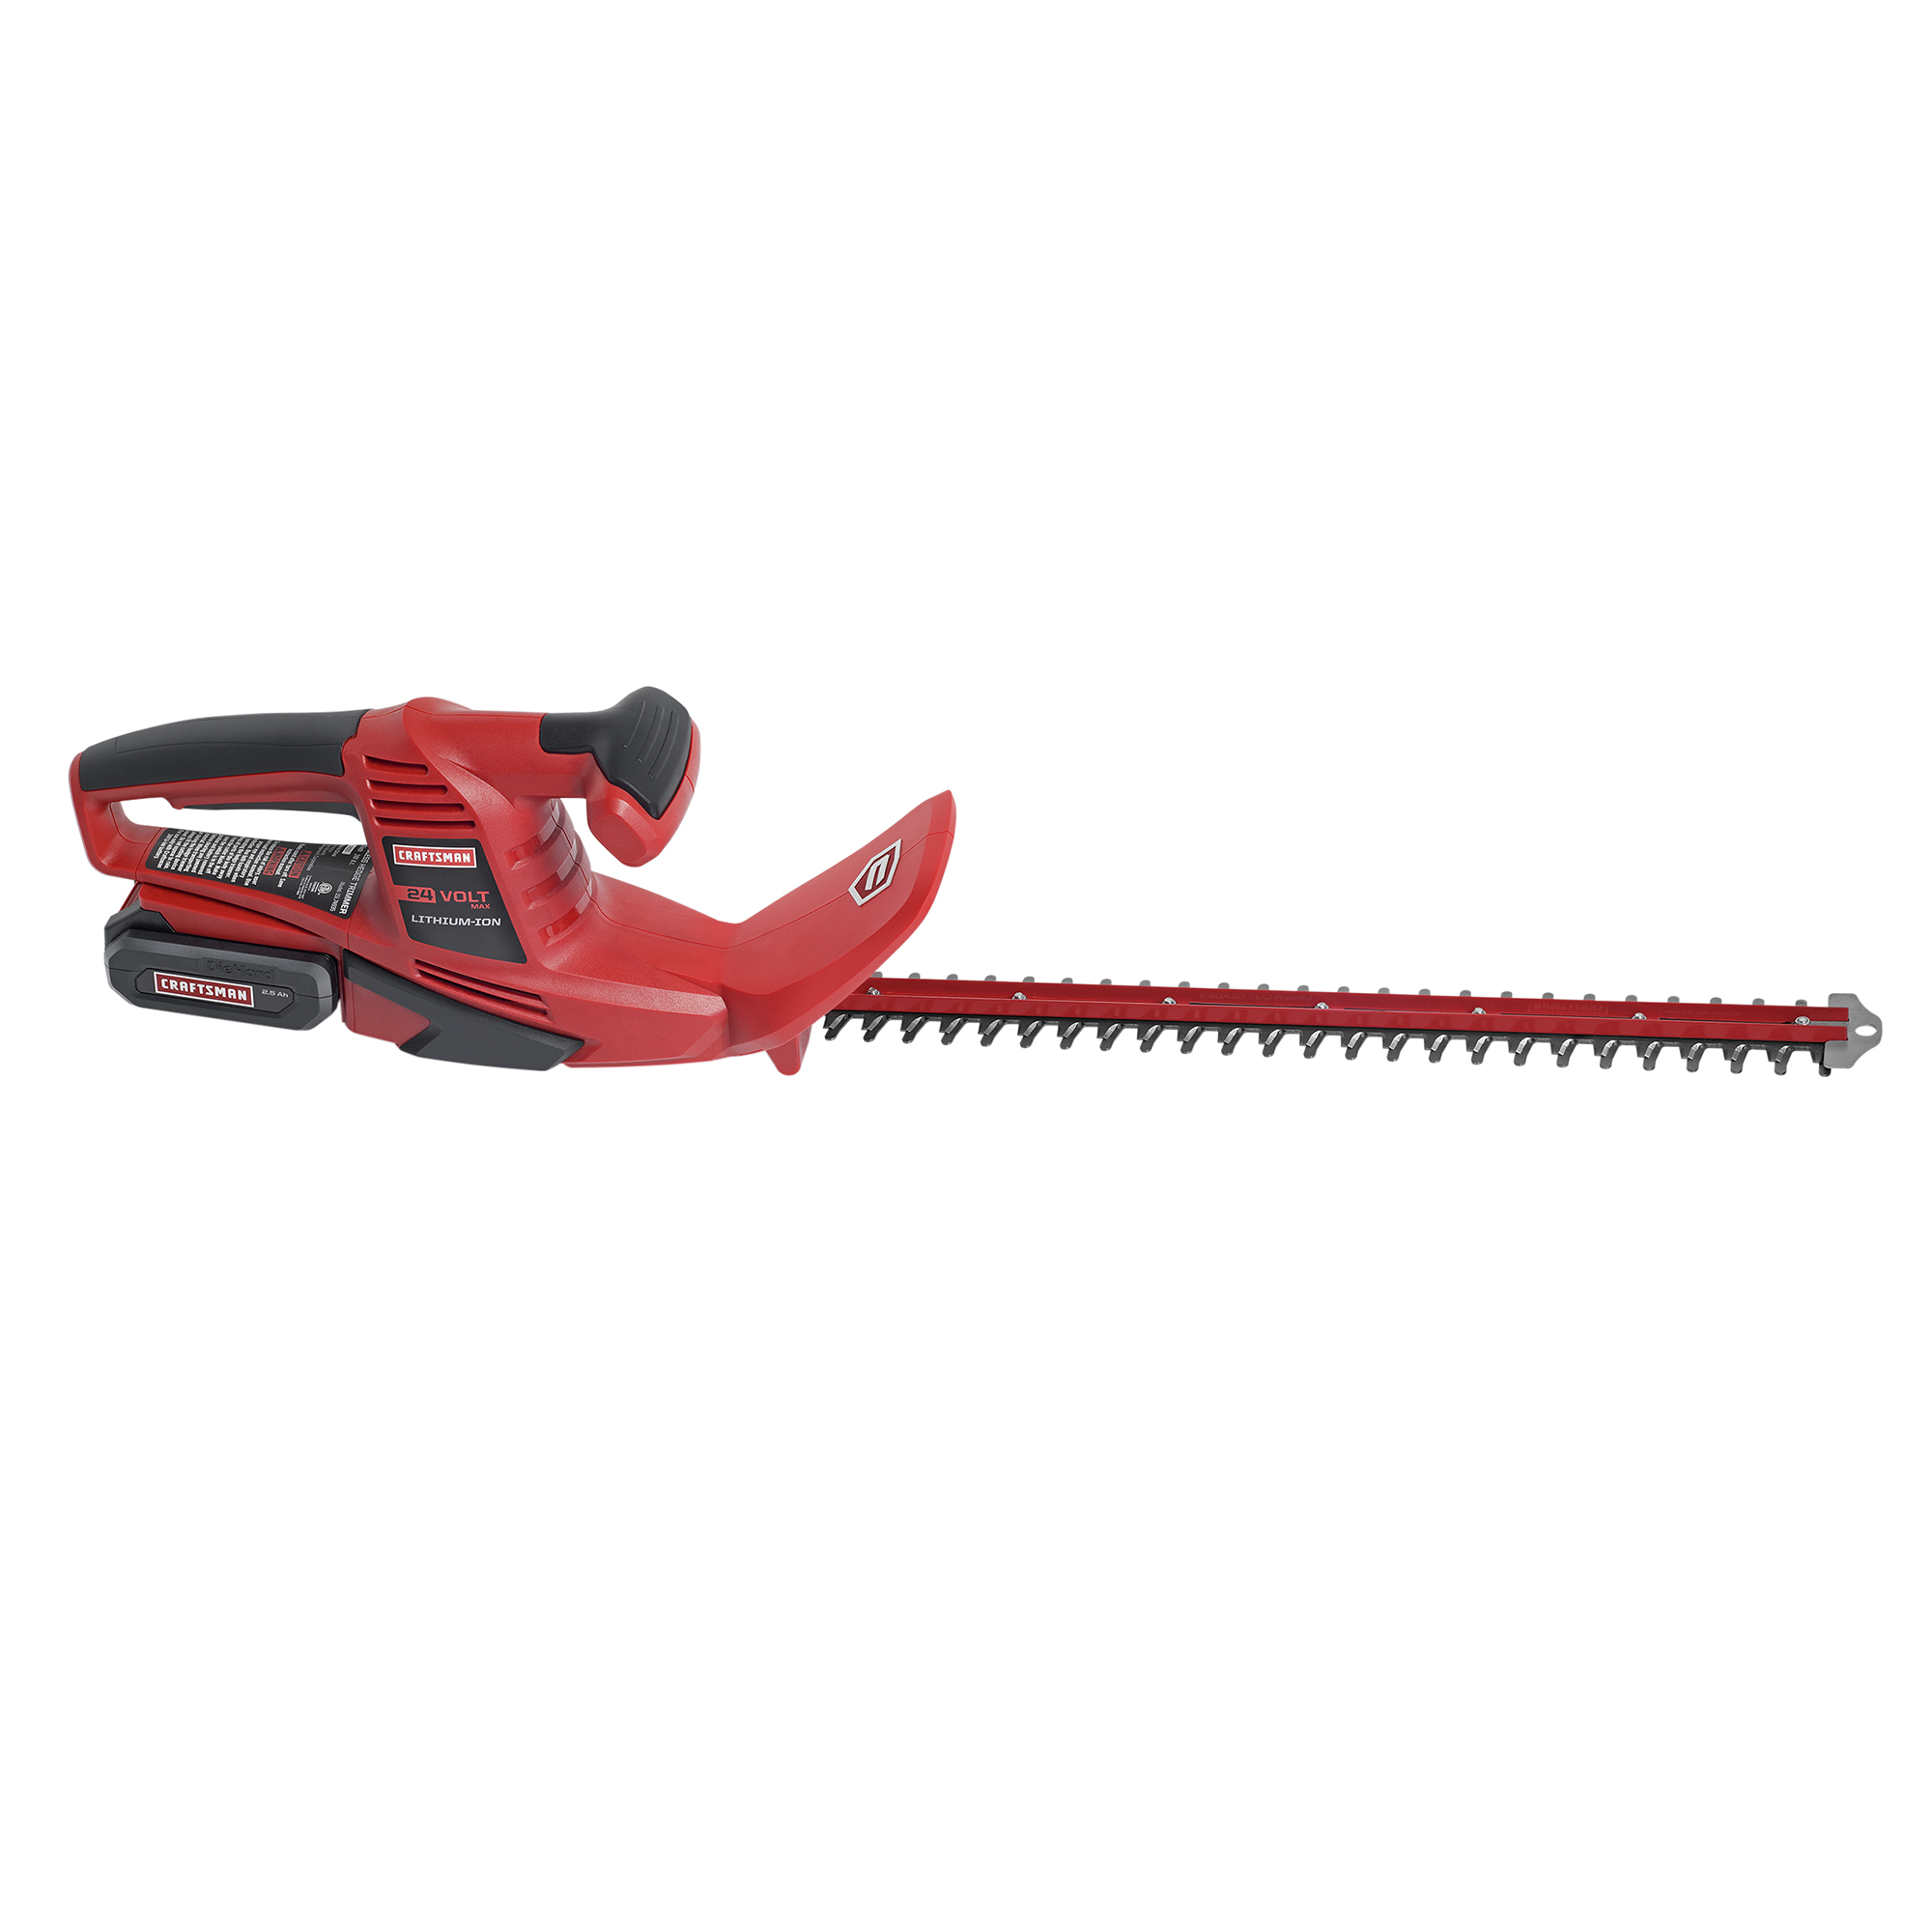 craftsman battery powered hedge trimmer